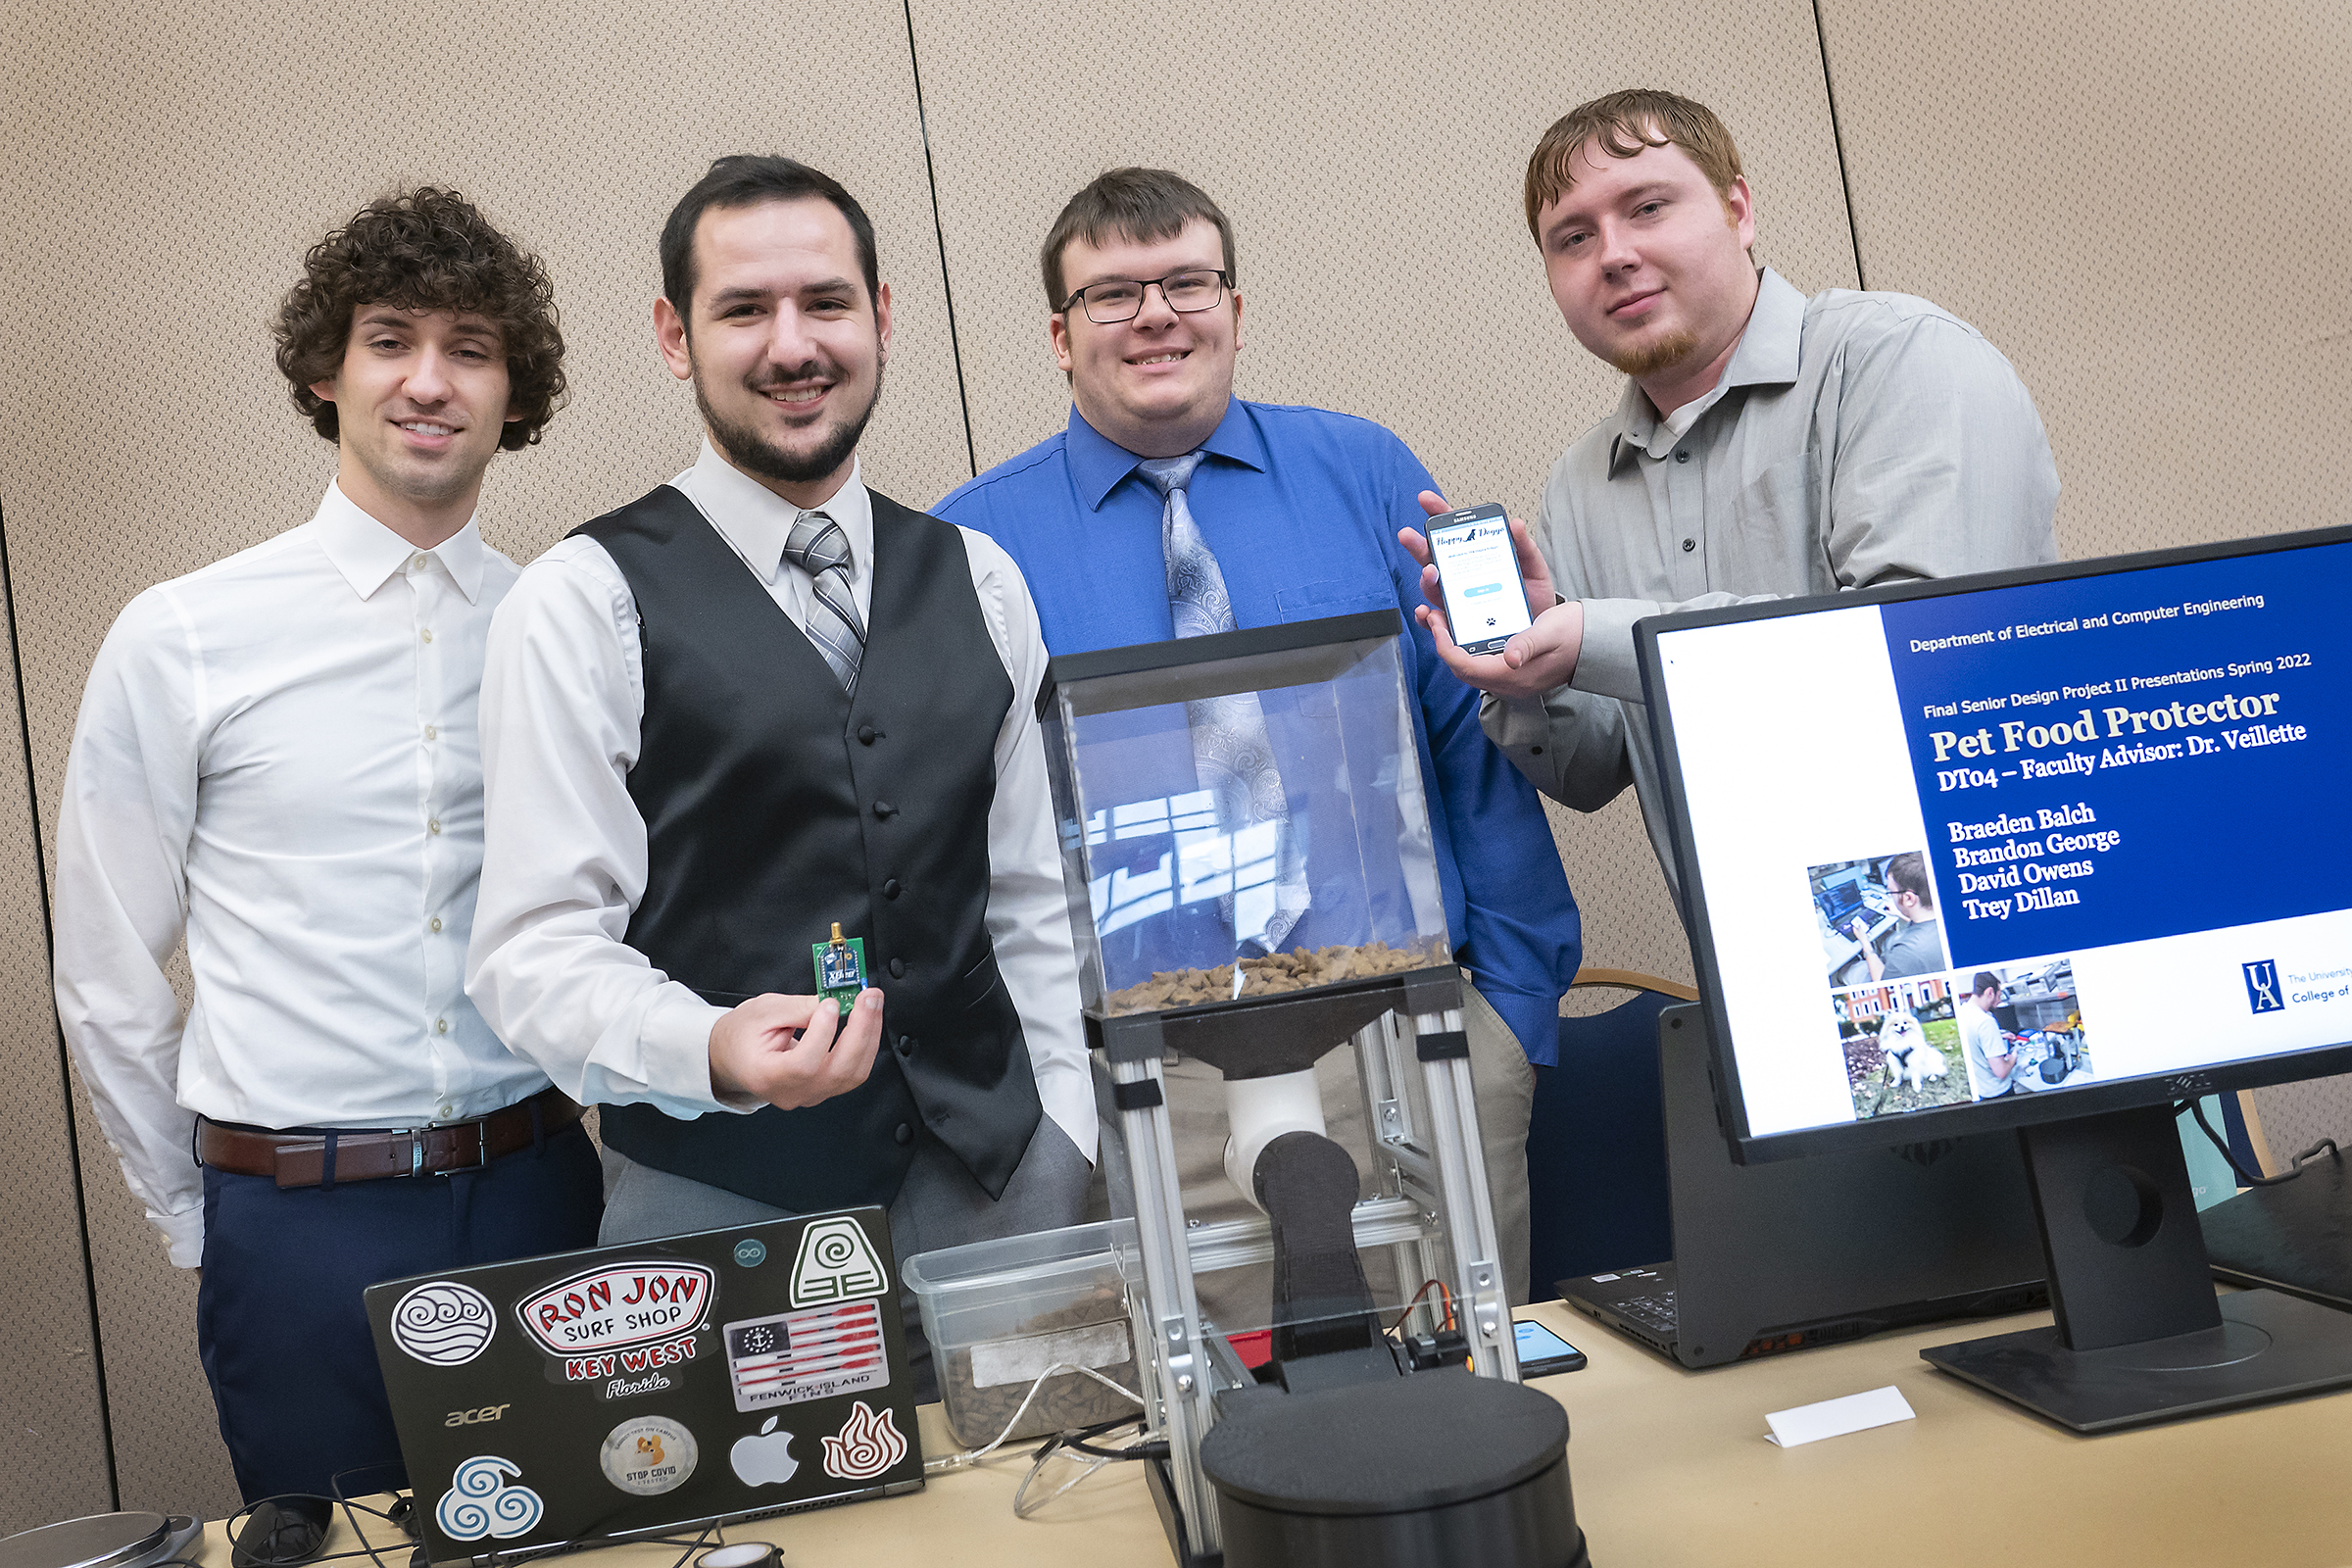 Trey Dillan, Braeden Balch, Brandon George, and David Owens are electrical and computer engineering students and protectors of pet overeating!